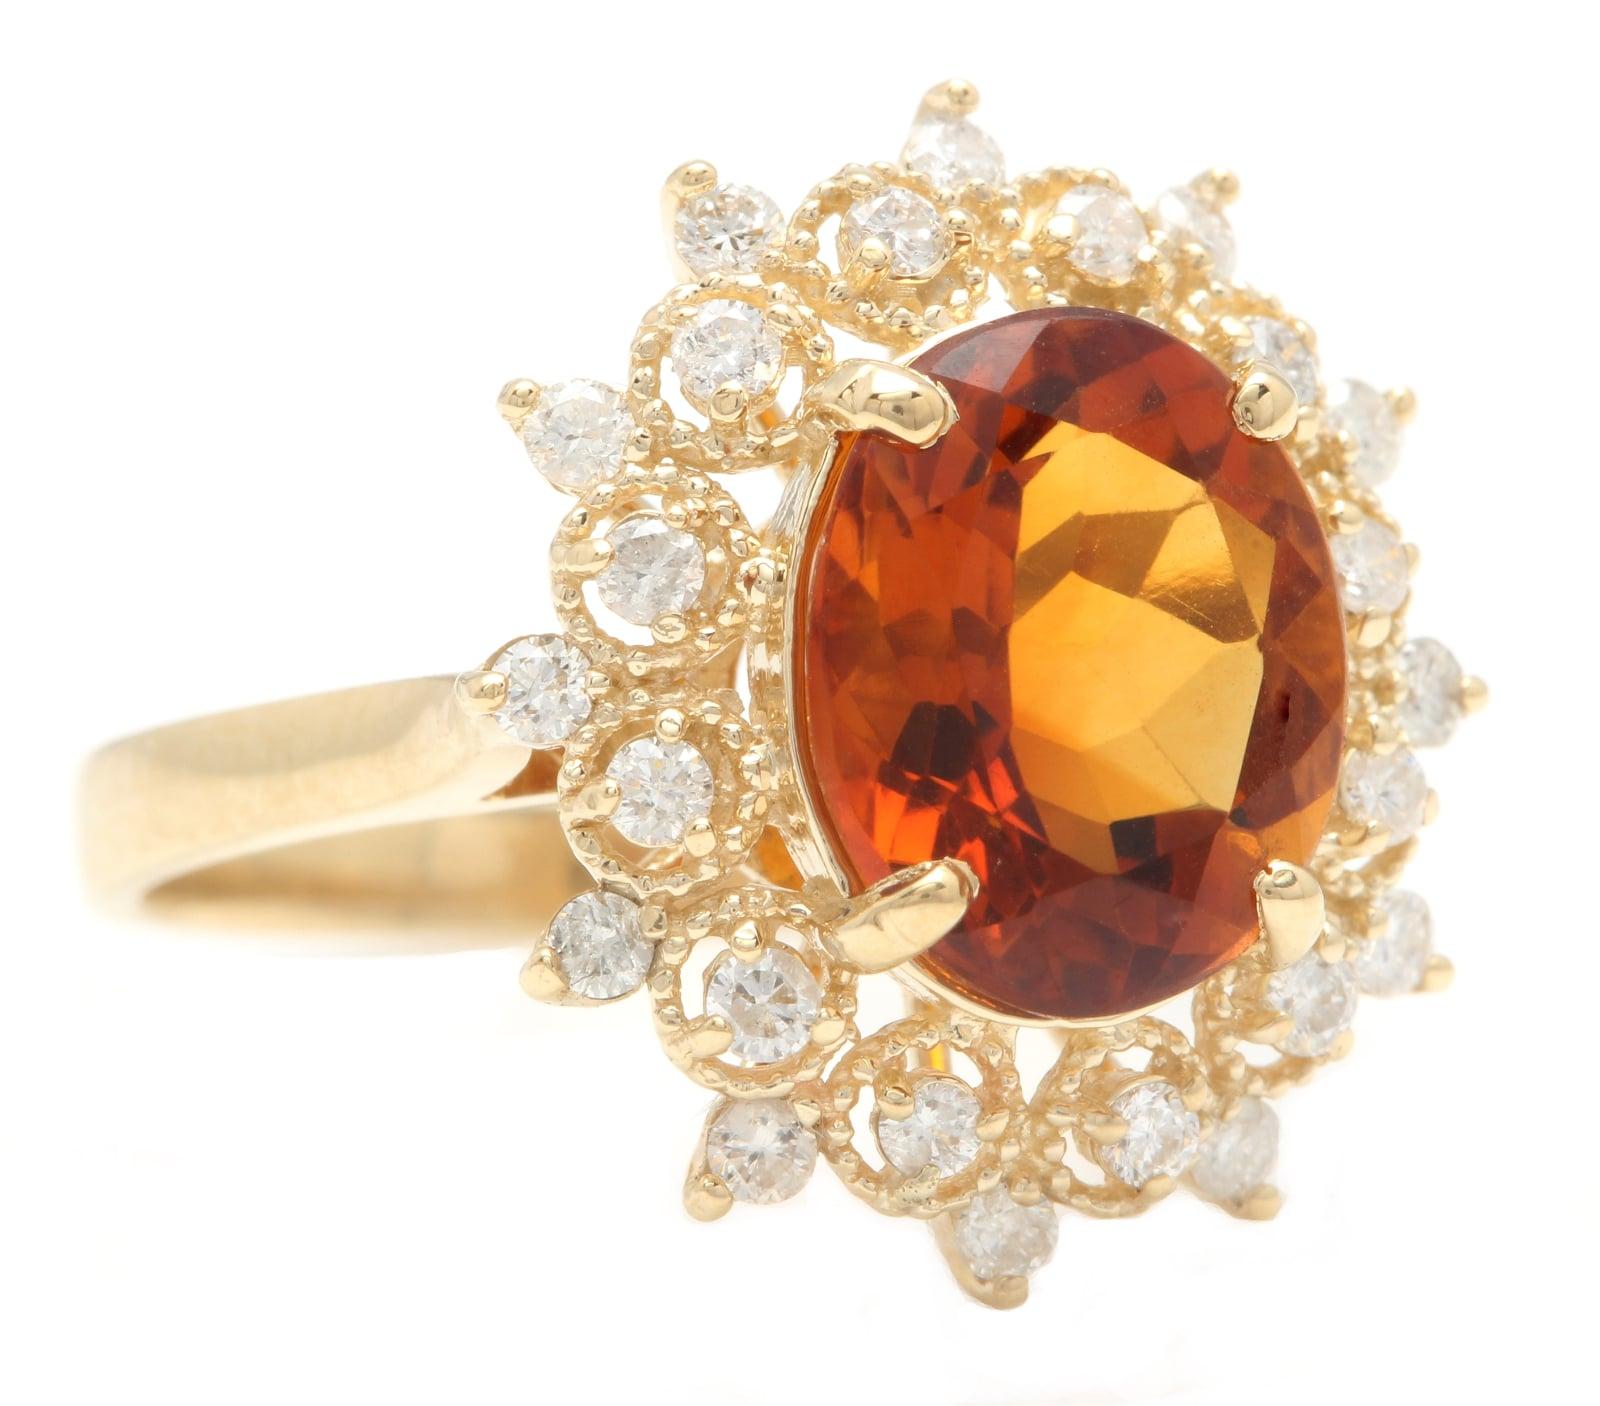 4.20 Carats Exquisite Natural Madeira Citrine and Diamond 14K Solid Yellow Gold Ring

Suggested Replacement Value: 4,500.00

Total Natural Citrine Weight is: 3.60 Carats 

Citrine Measures: 11.00 x 9.00mm

Natural Round Diamonds Weight: 0.60 Carats